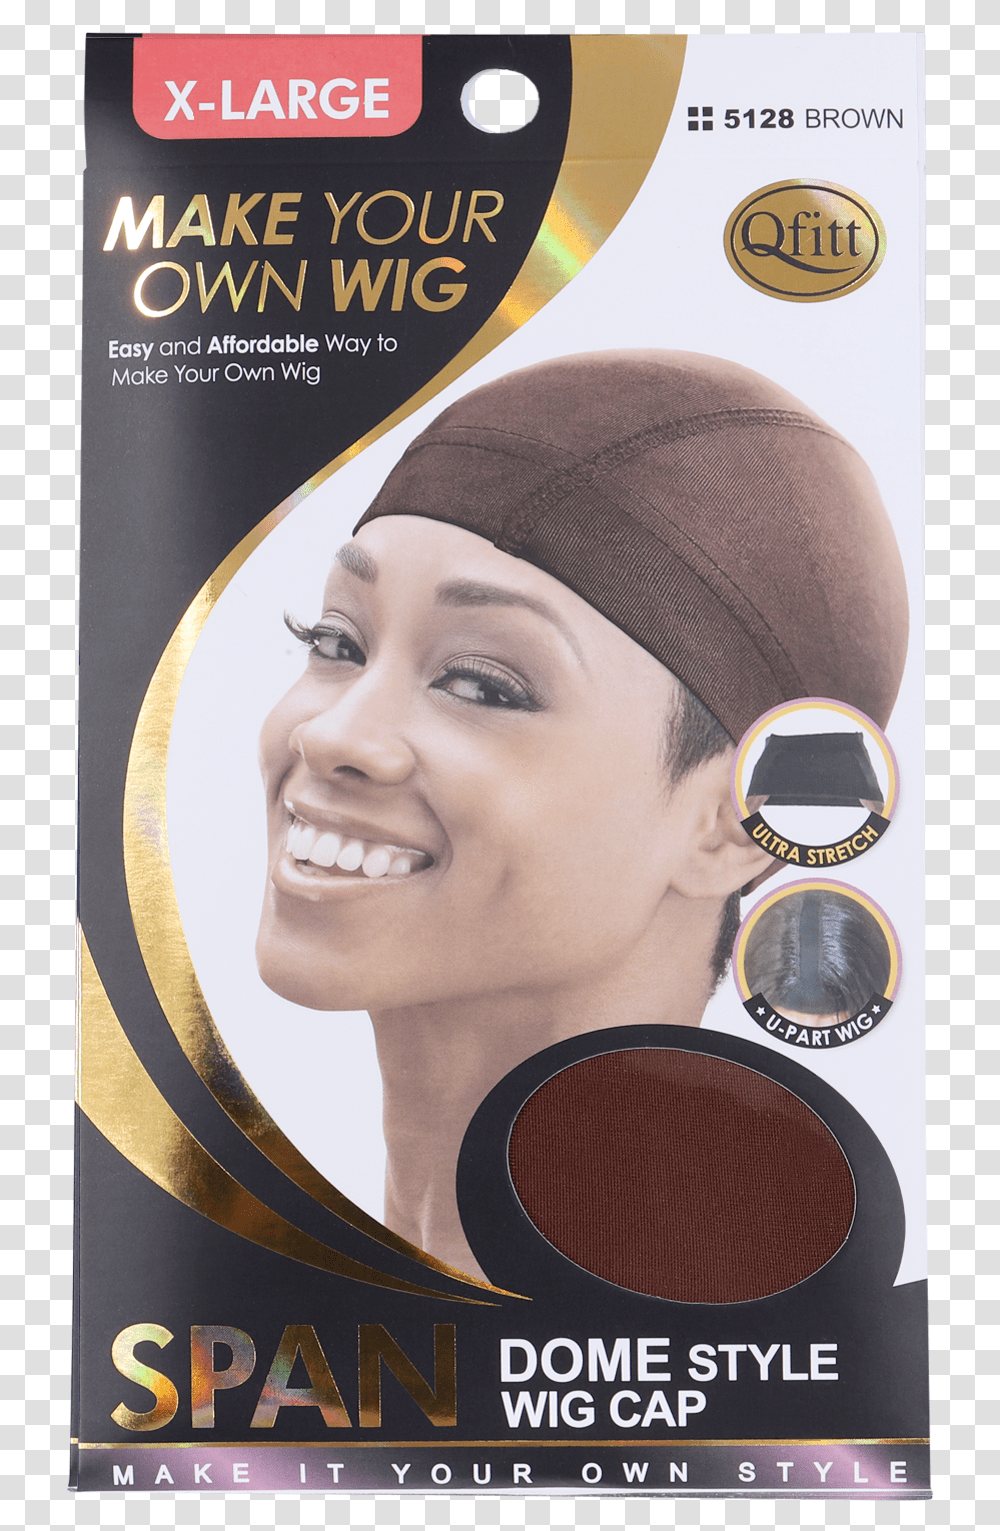 M Amp M X Large Span Dome Style Wig Cap Brown Dome Wig Cap, Apparel, Poster, Advertisement Transparent Png